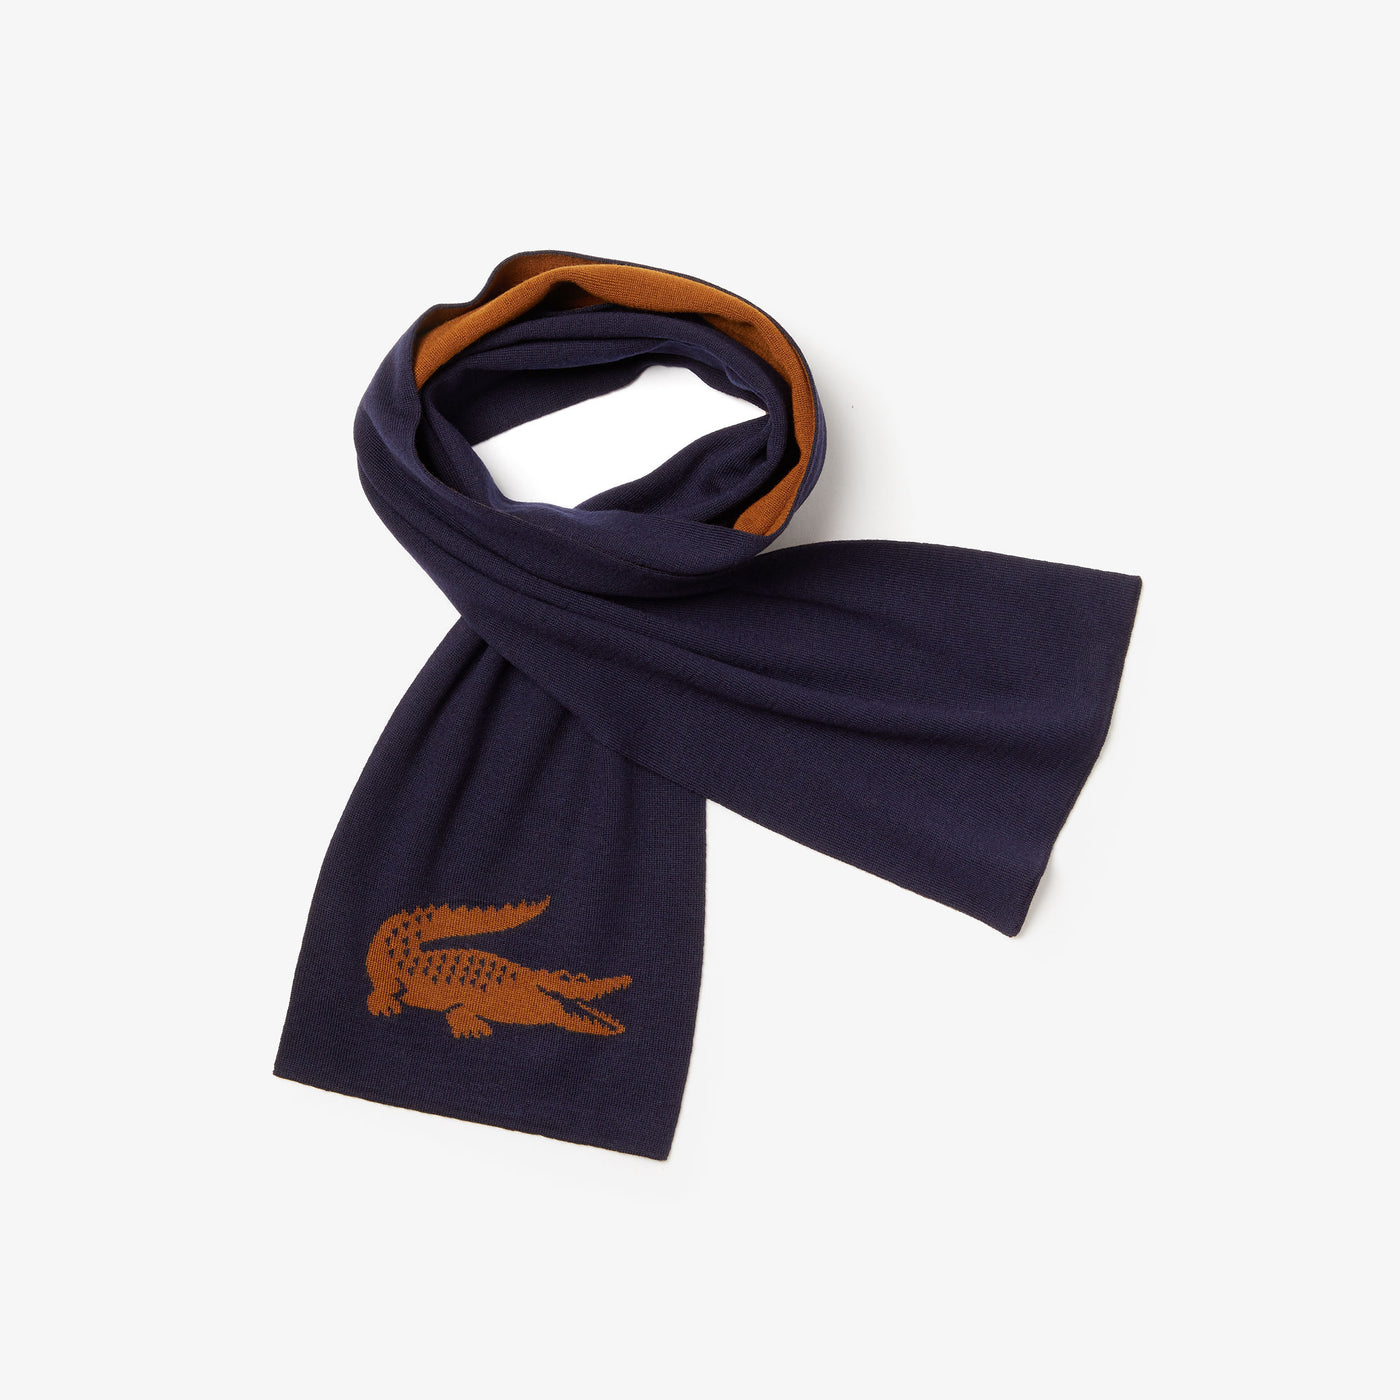 Shop The Latest Collection Of Lacoste Men'S Jacquard Crocodile Wool Scarf - Re3536 In Lebanon